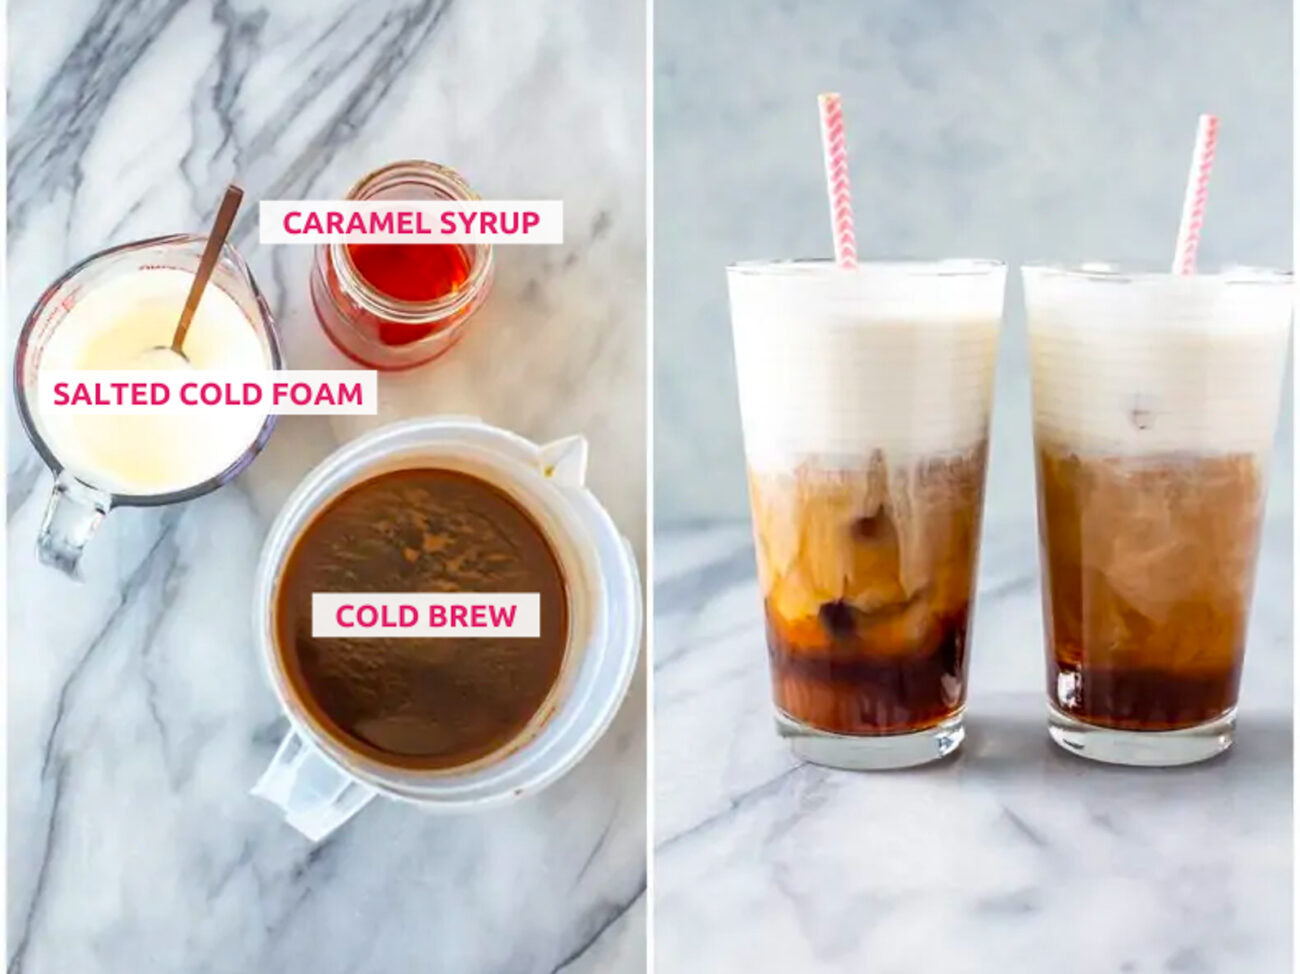 Ingredients for salted caramel cream cold brew: cold brew coffee, salted cold foam and caramel syrup.